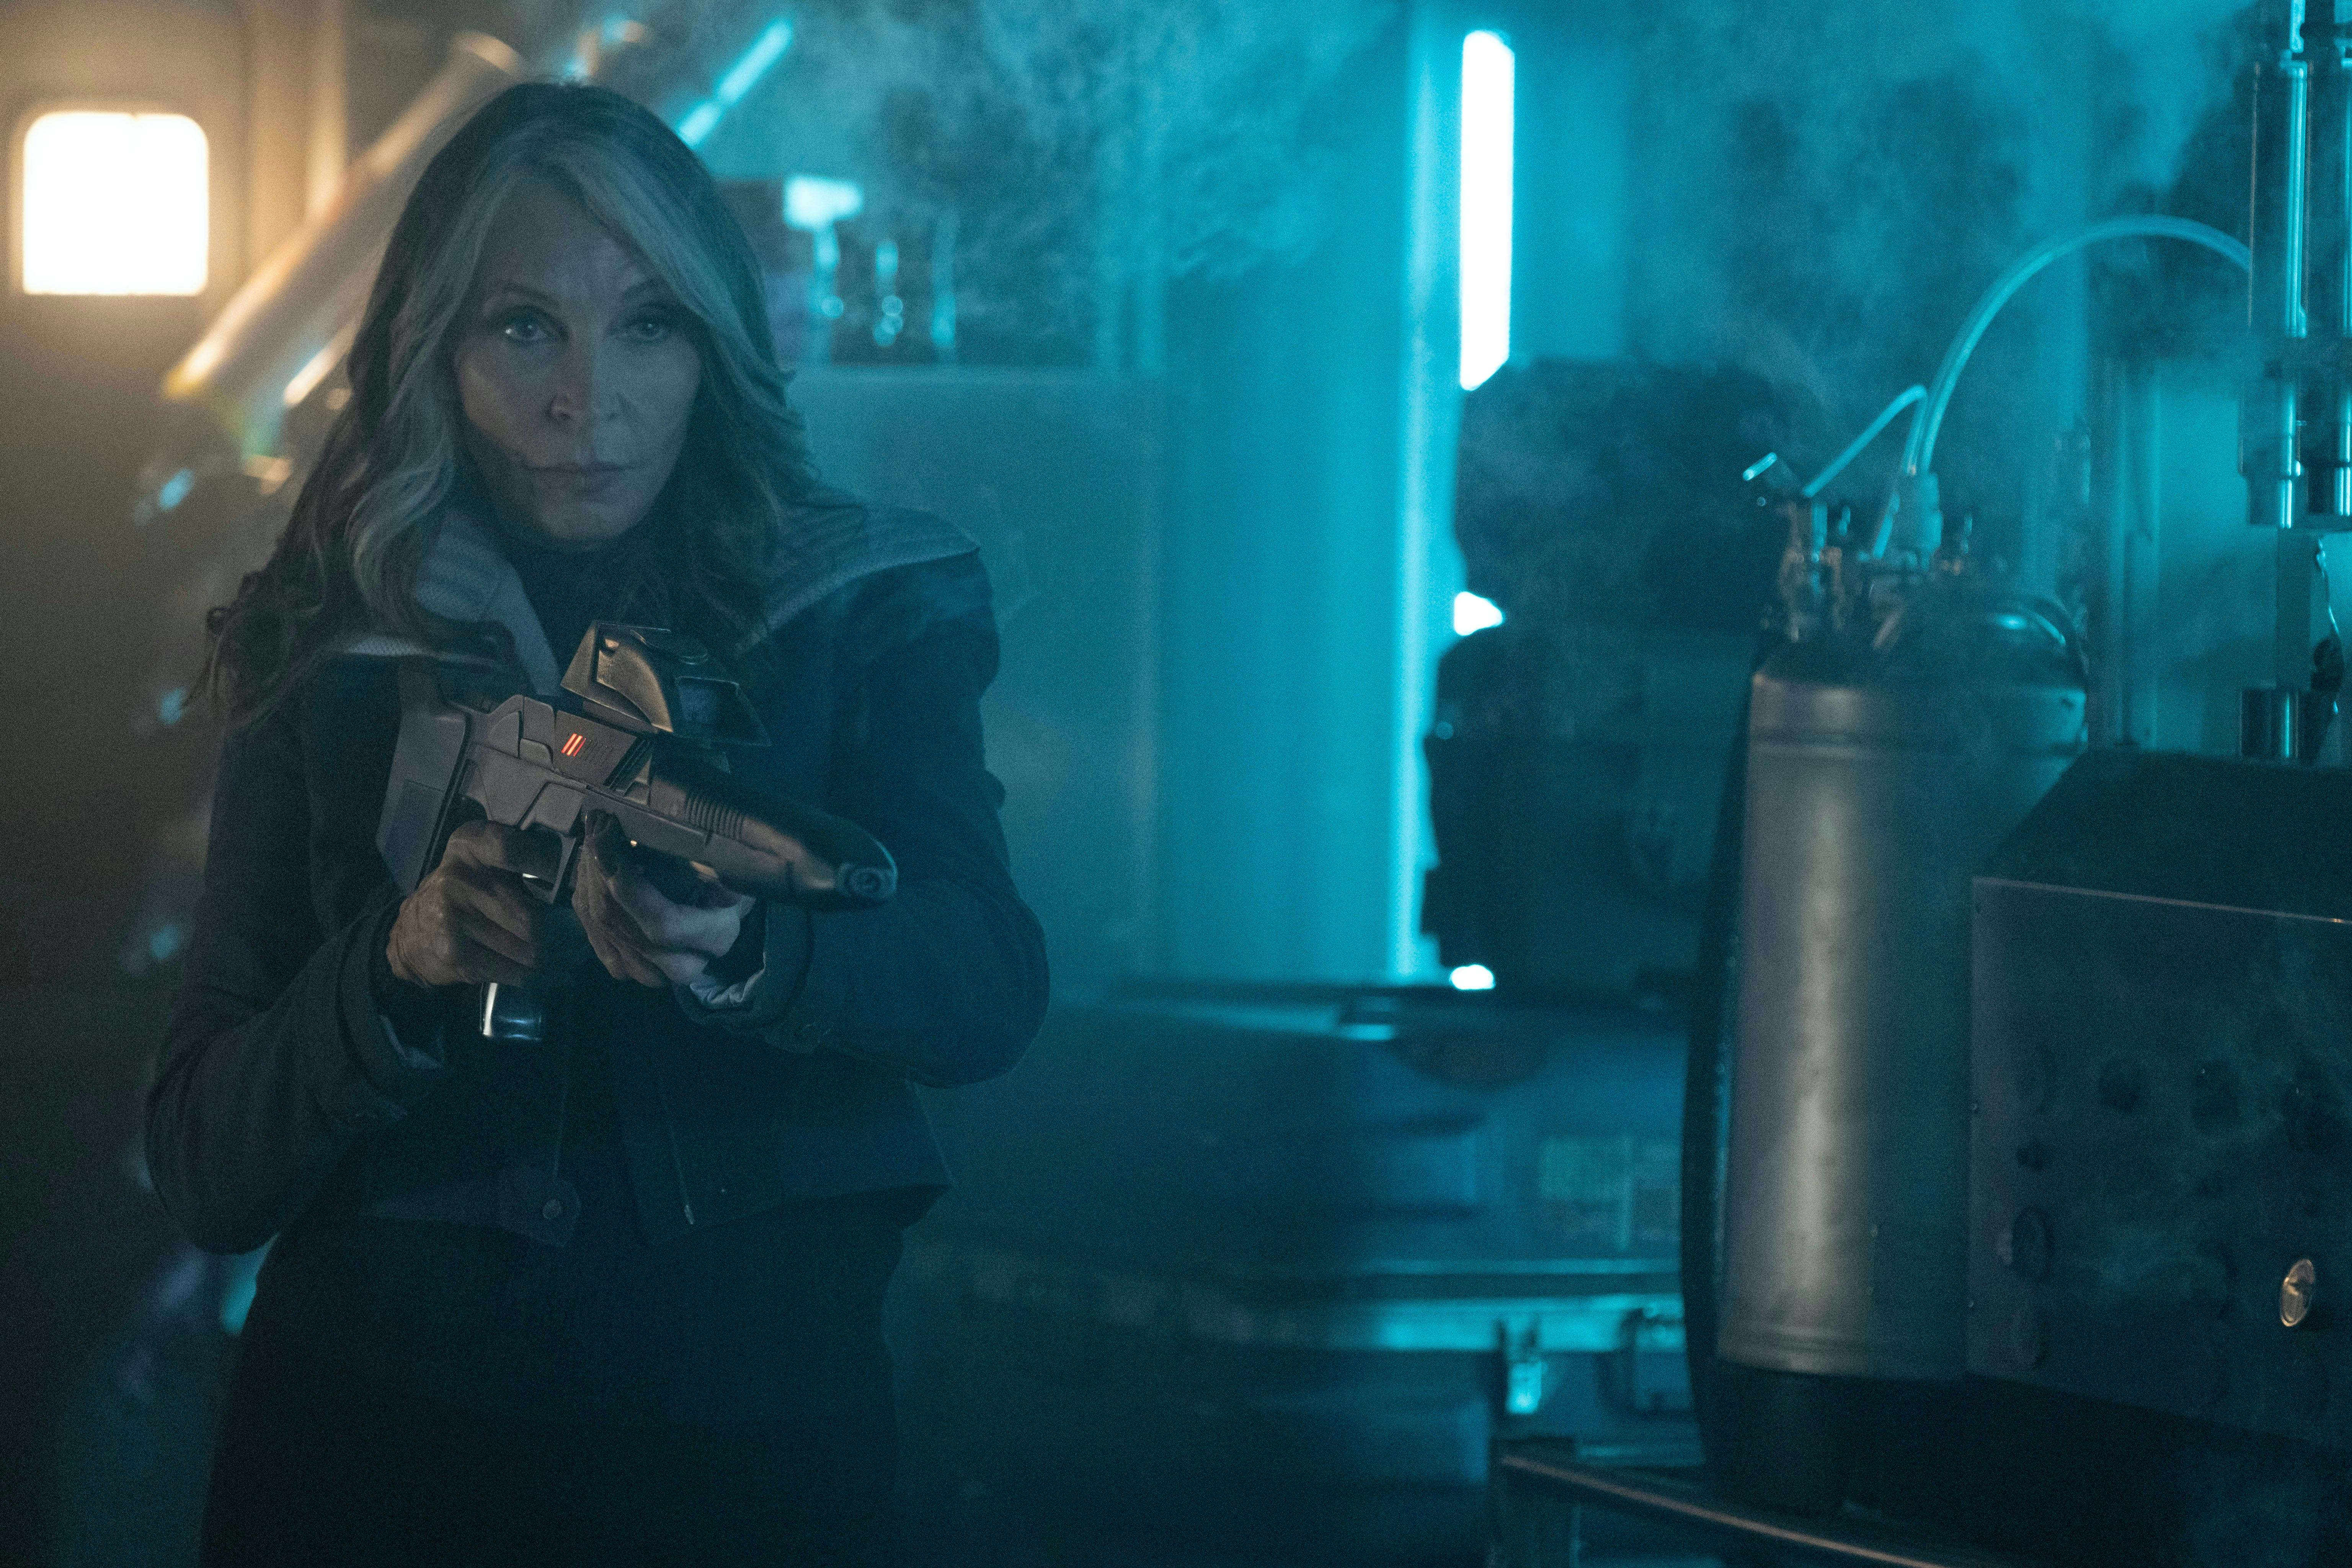 Star Trek: Picard 'The Next Generation' - Beverly Crusher holds her blaster in a defensive stance